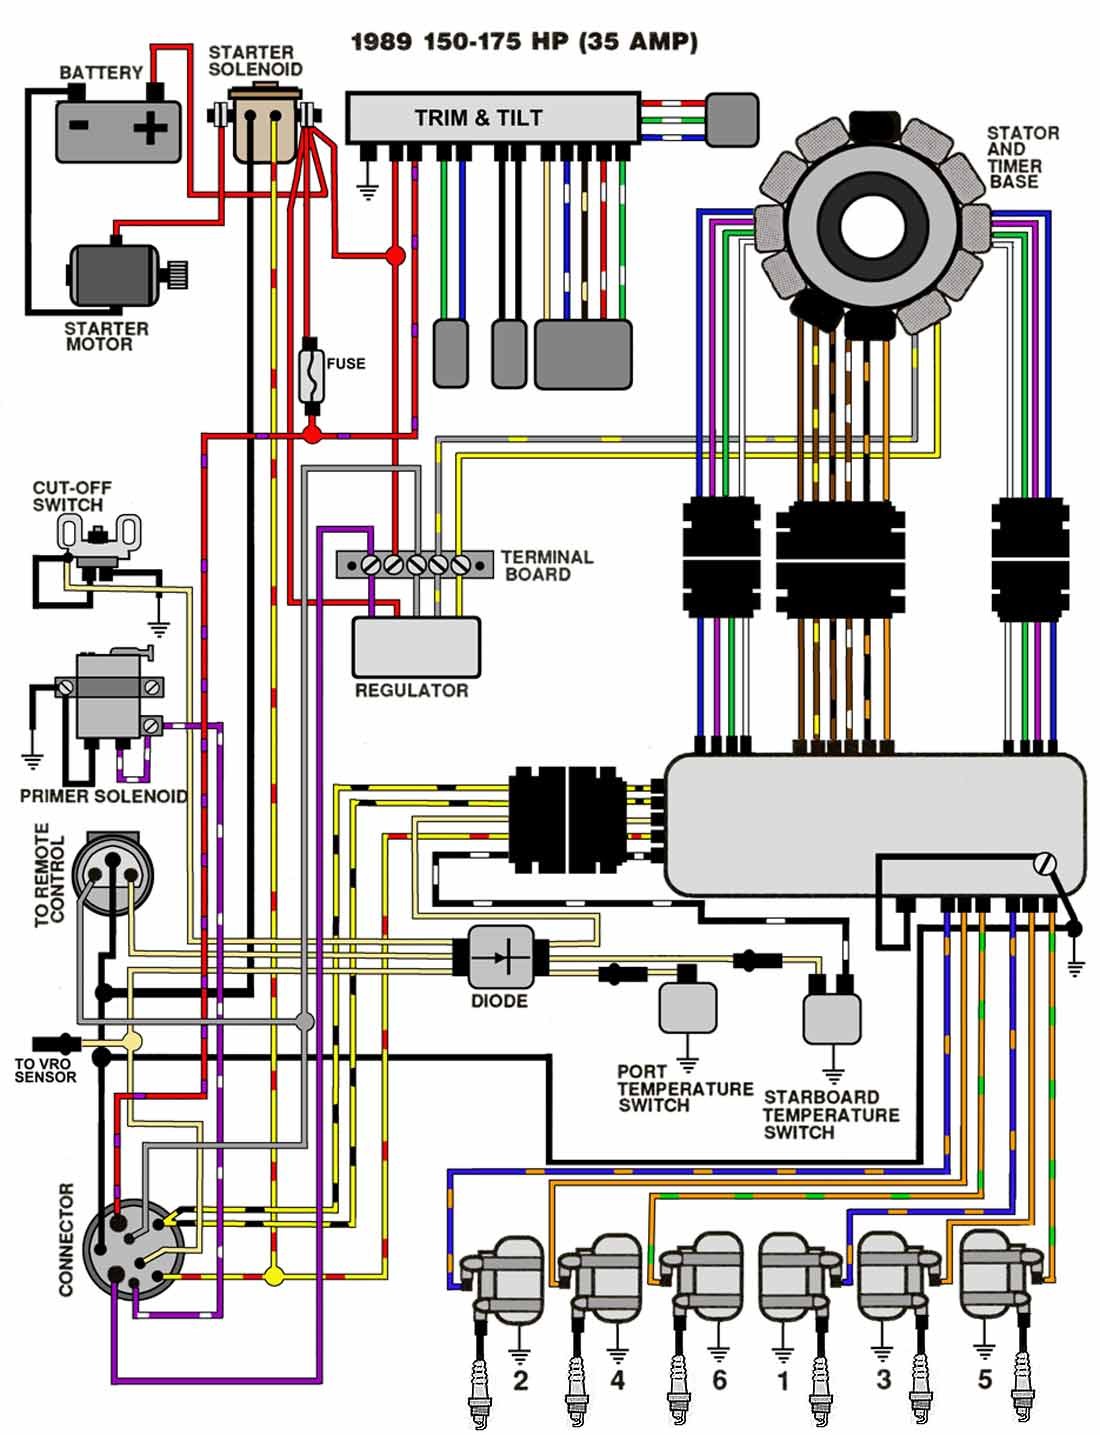 New Evinrude Ignition Switch Wiring Diagram 57 electric Stuning Mercury Outboard